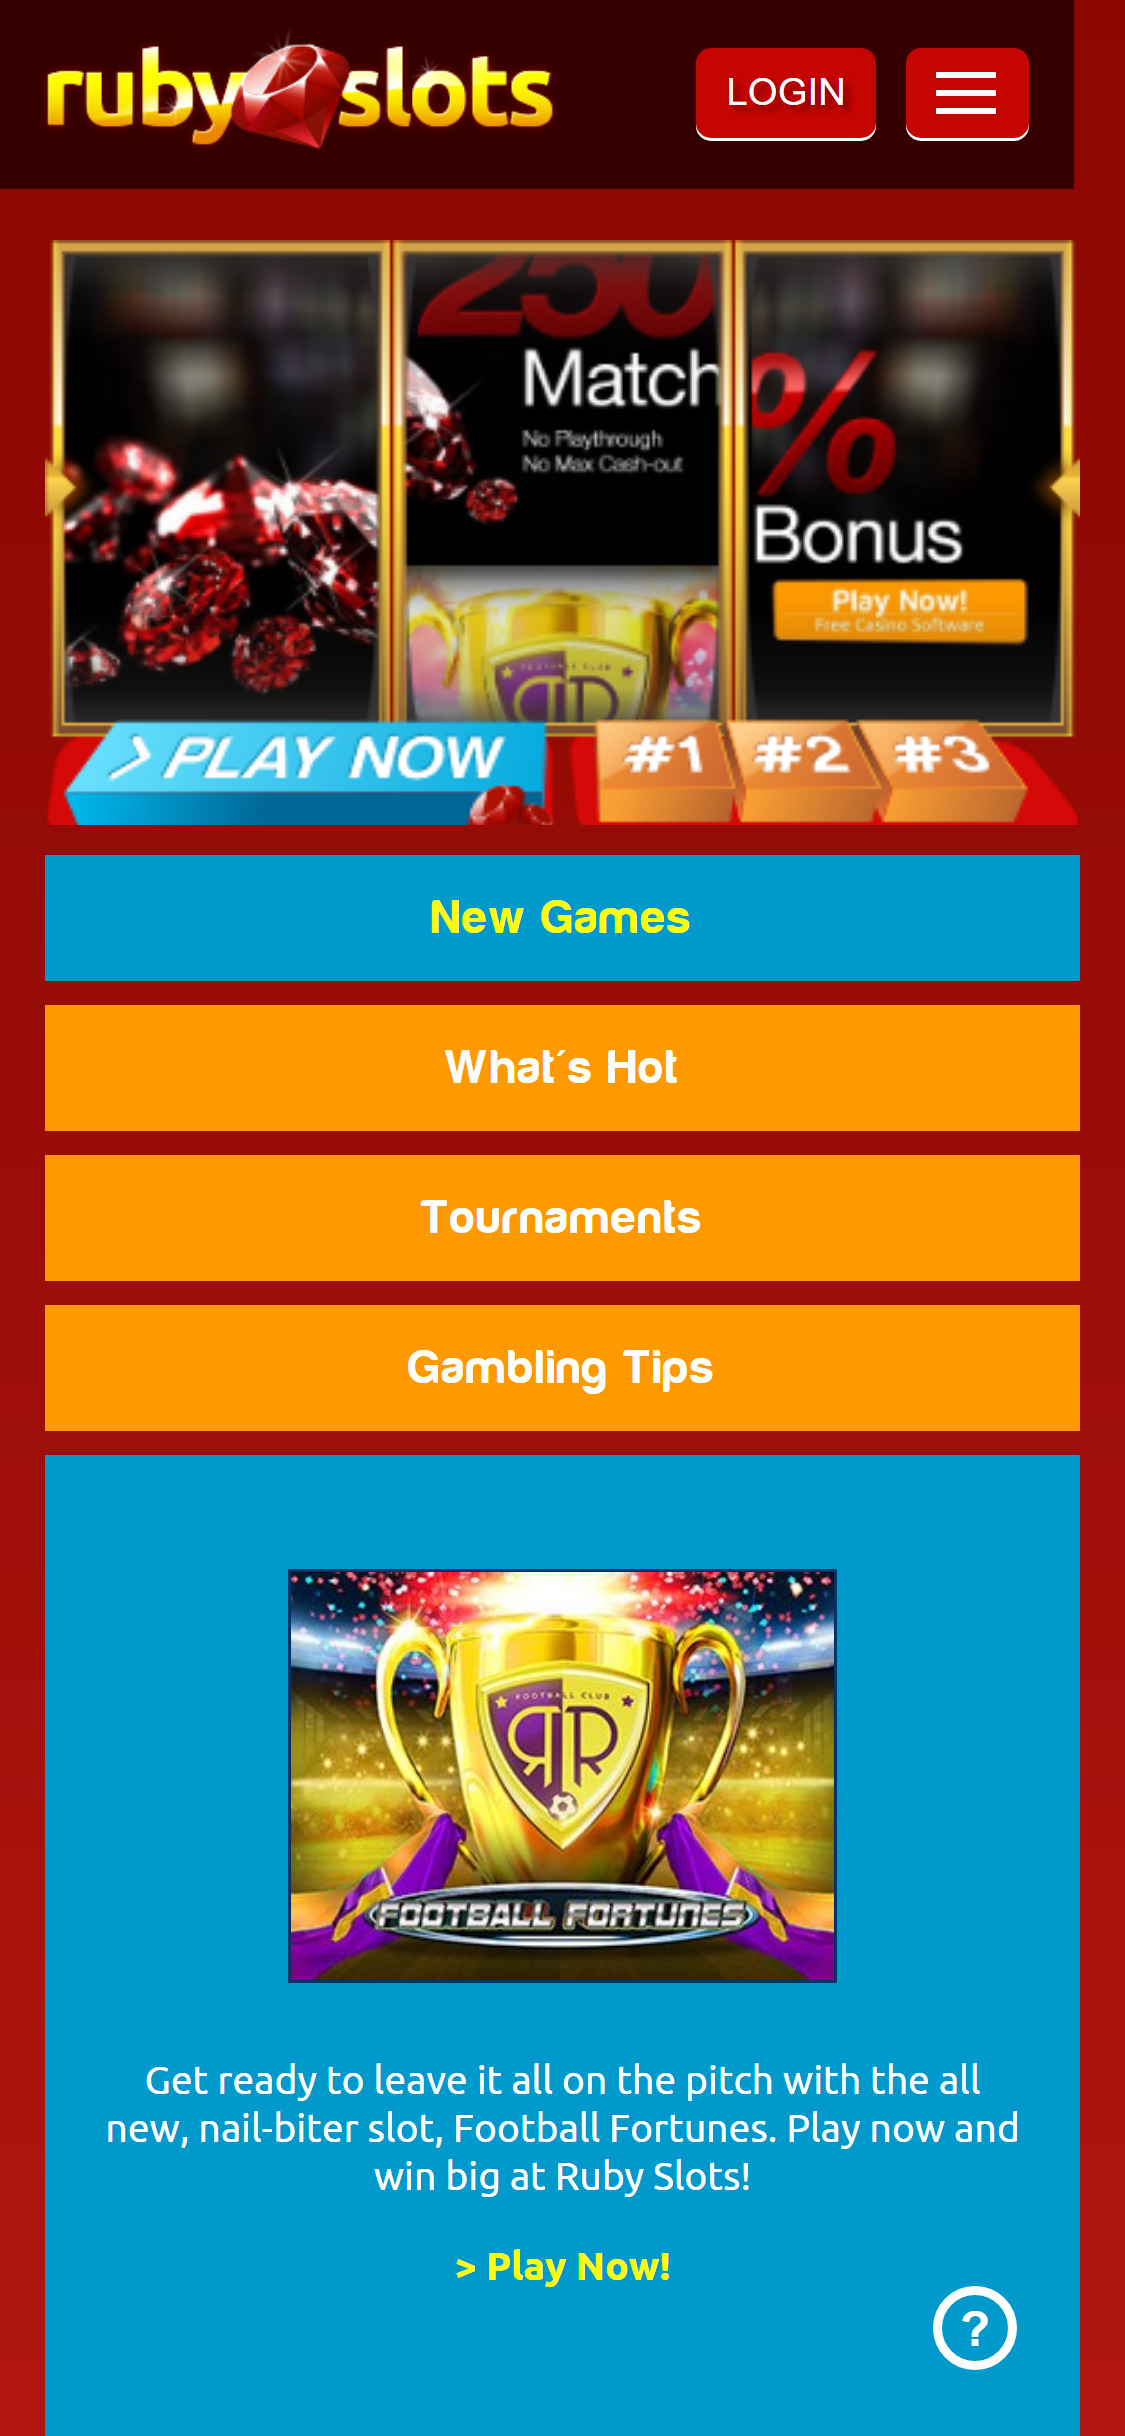 Ruby Slots Casino Mobile Review